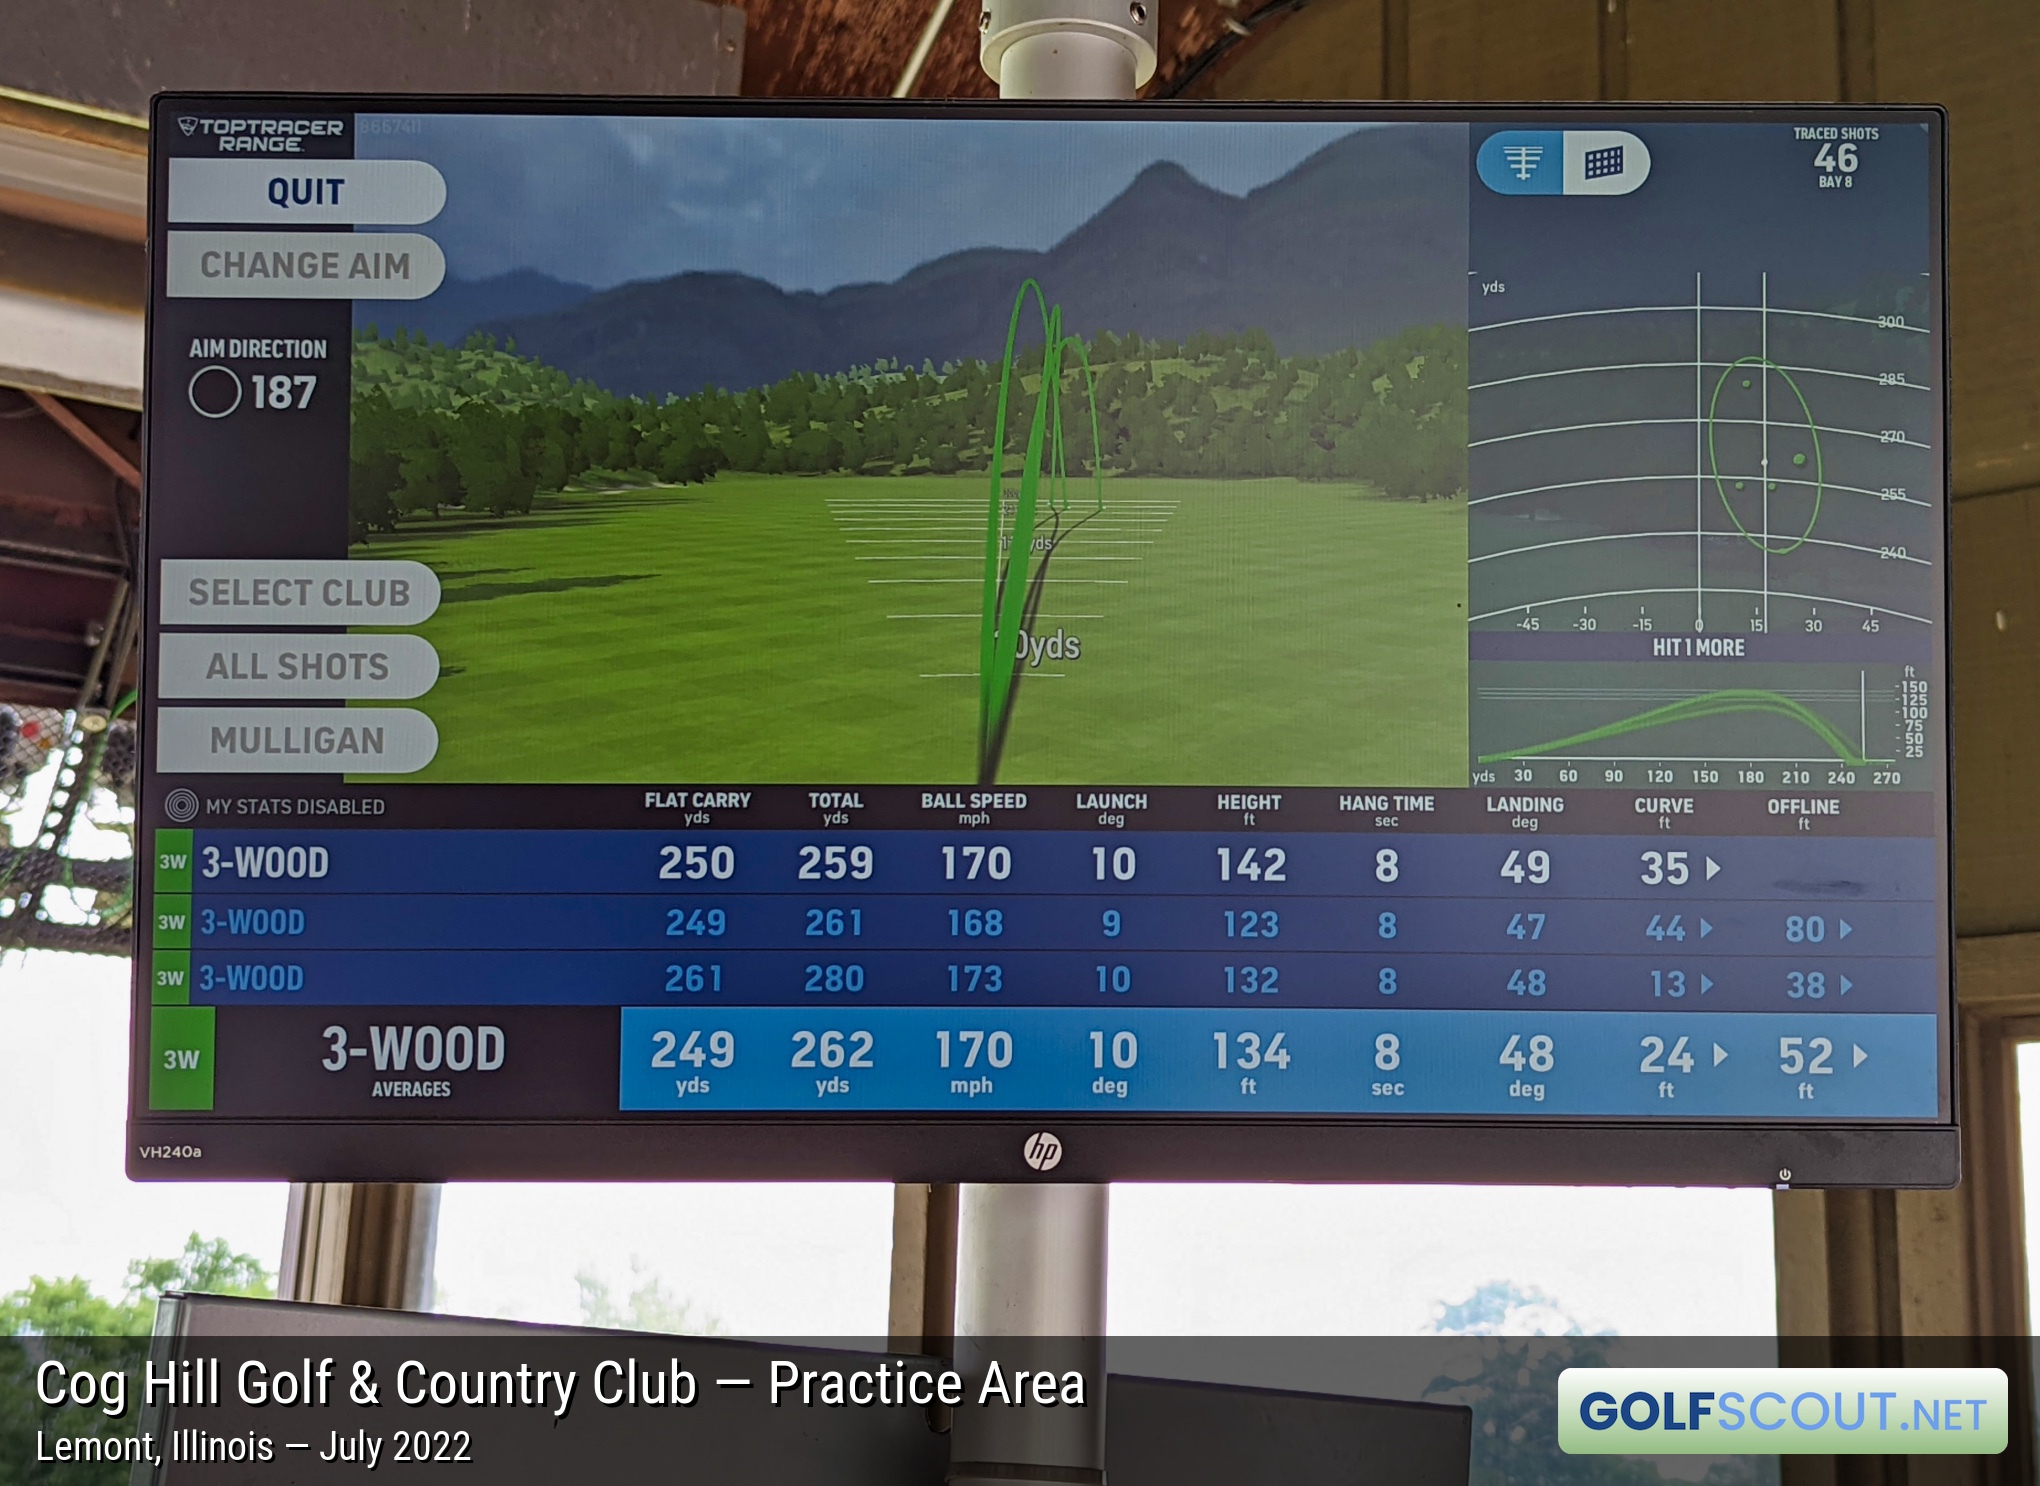 Photo of the practice area at Cog Hill Course #2 - Ravines in Lemont, Illinois. TopTracer keeps track of all your shots. You get the carry distance, total distance, ball speed, launch angle, height, hang time, etc. Really cool to see your cumulative shot stats and trajectories.